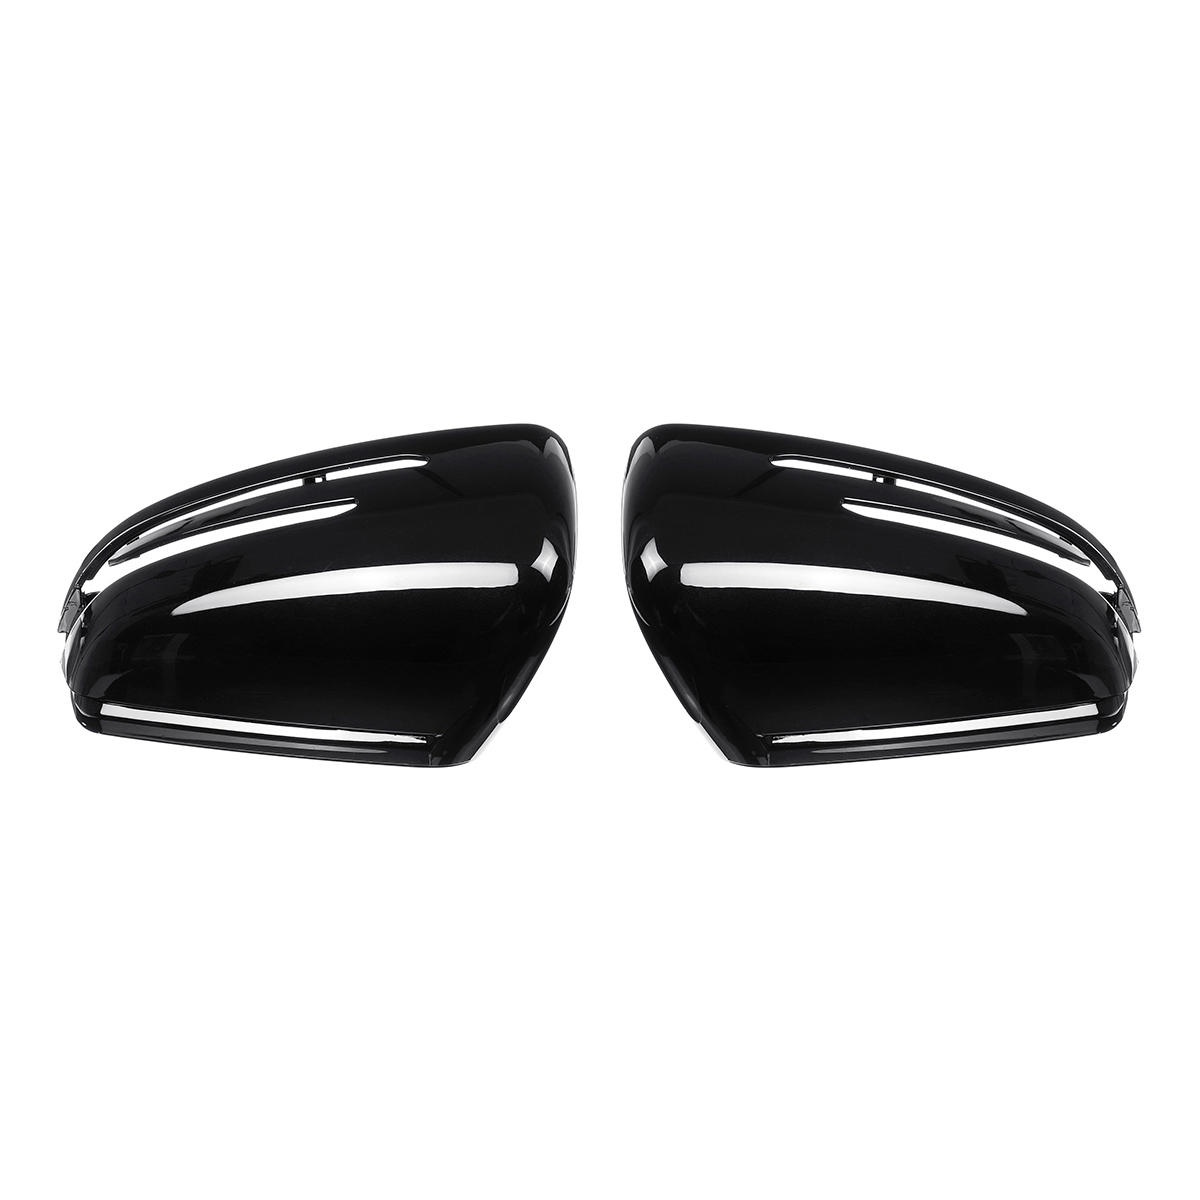 

Left/Right Car Rearview Mirror Cover Black For BENZ W204 W176 W246 W212 W221 CLS GLA CLA